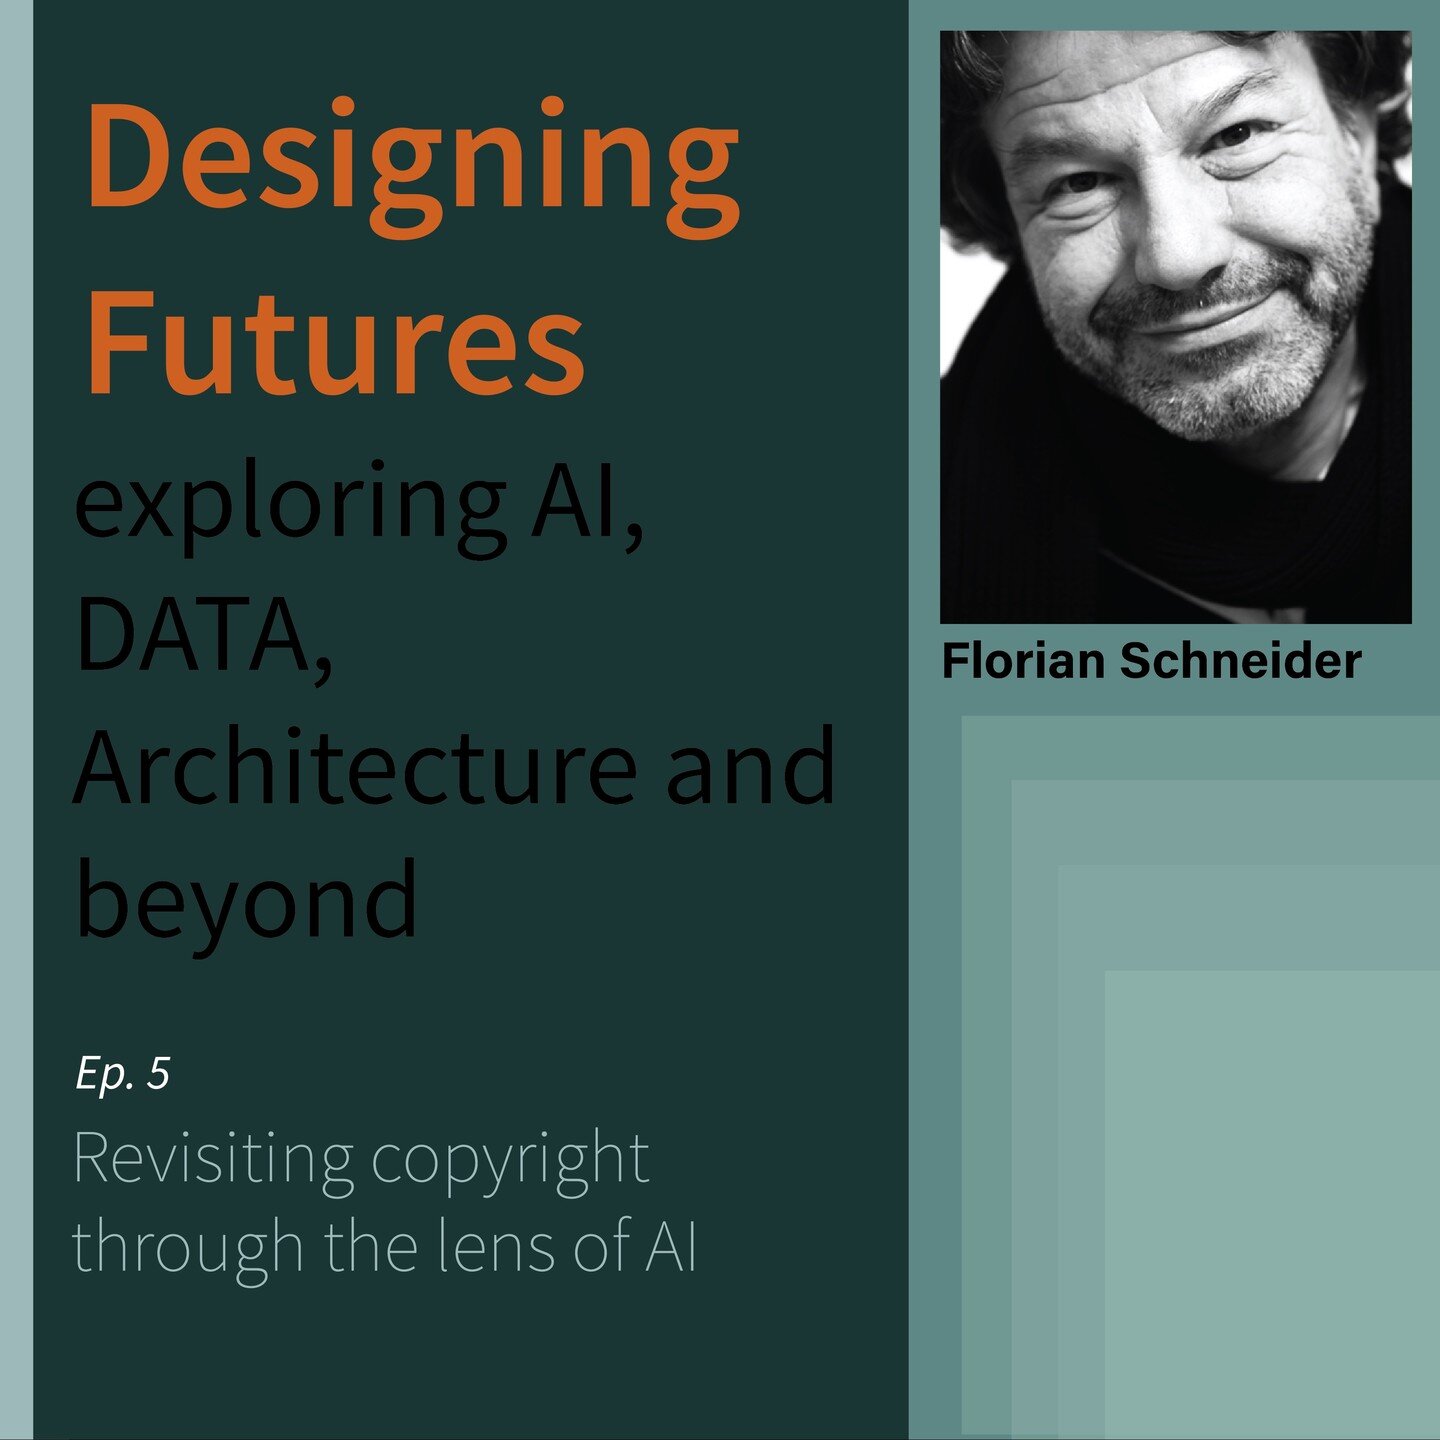 🎙️Designing Futures / EP 5 -Revisiting Copyright Through the Lens of AI
In this episode, we're joined by Florian Schneider, a prominent figure navigating the intersections of art, technology, and documentary practices. As a filmmaker, writer, curato